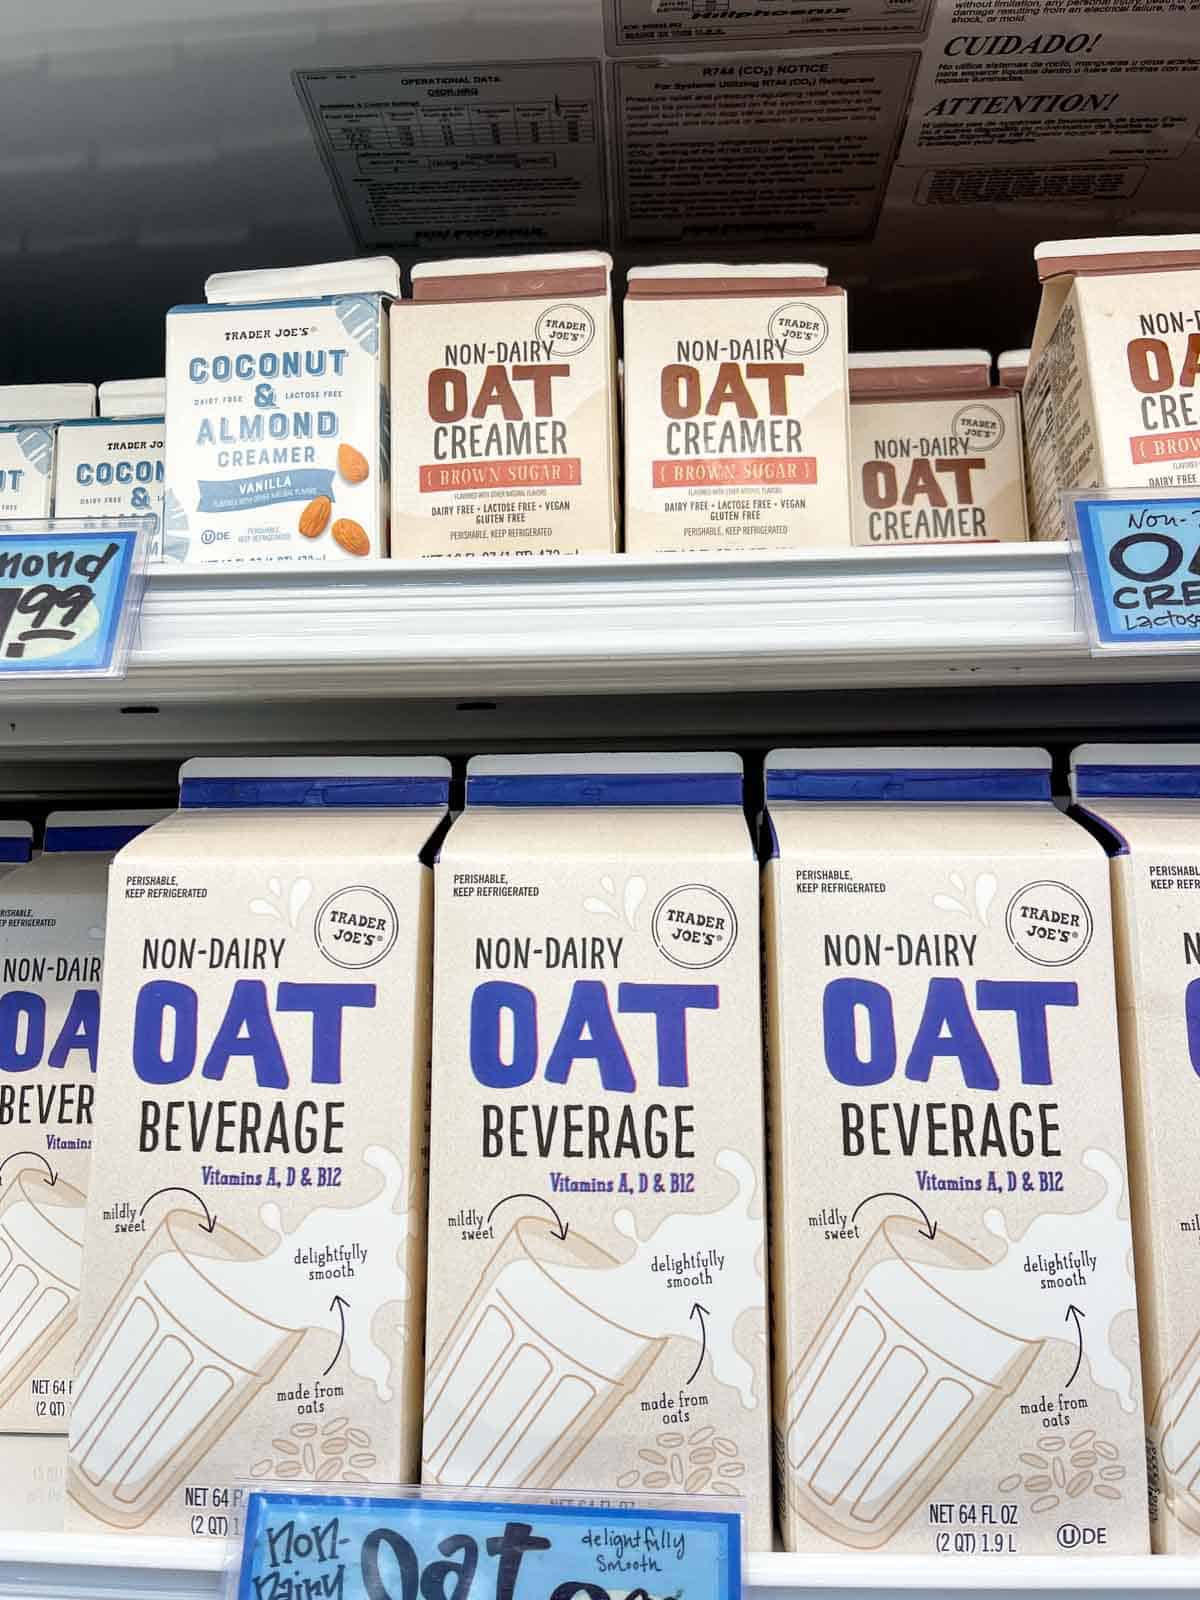 Shelves at a grocery store with cartons of oat milk beverages